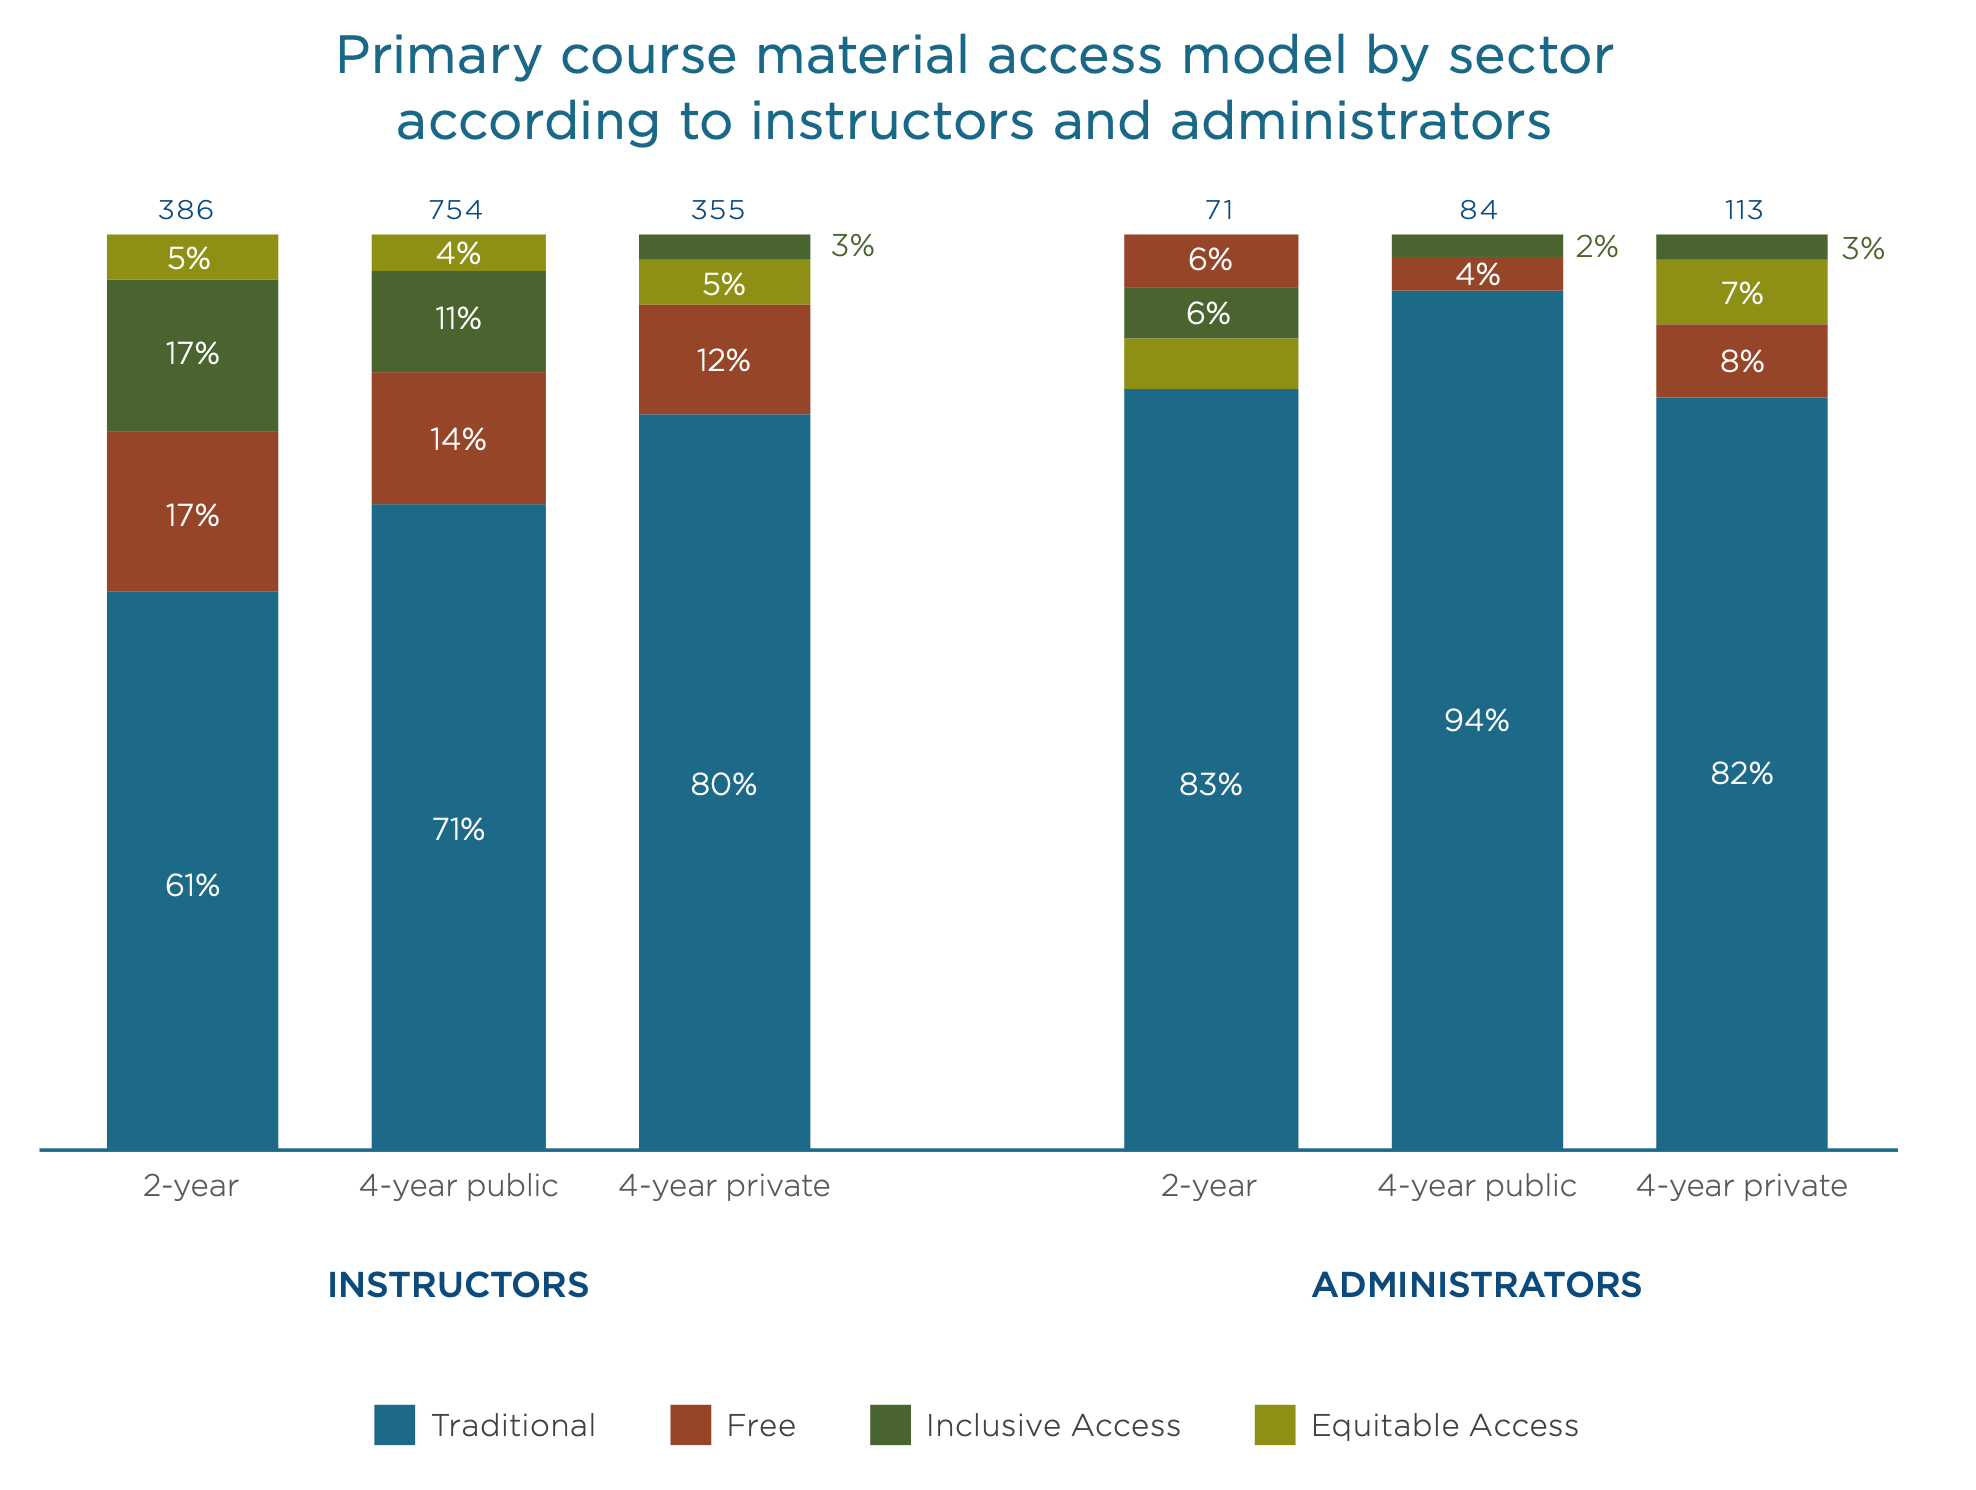 Bar chart showing primary course material access model by sector (2-year, 4-year public, 4-year private) according to instructors and administrators. By far the most popular model for all sectors and respondents is traditional as opposed to free or inclusive or equitable access.